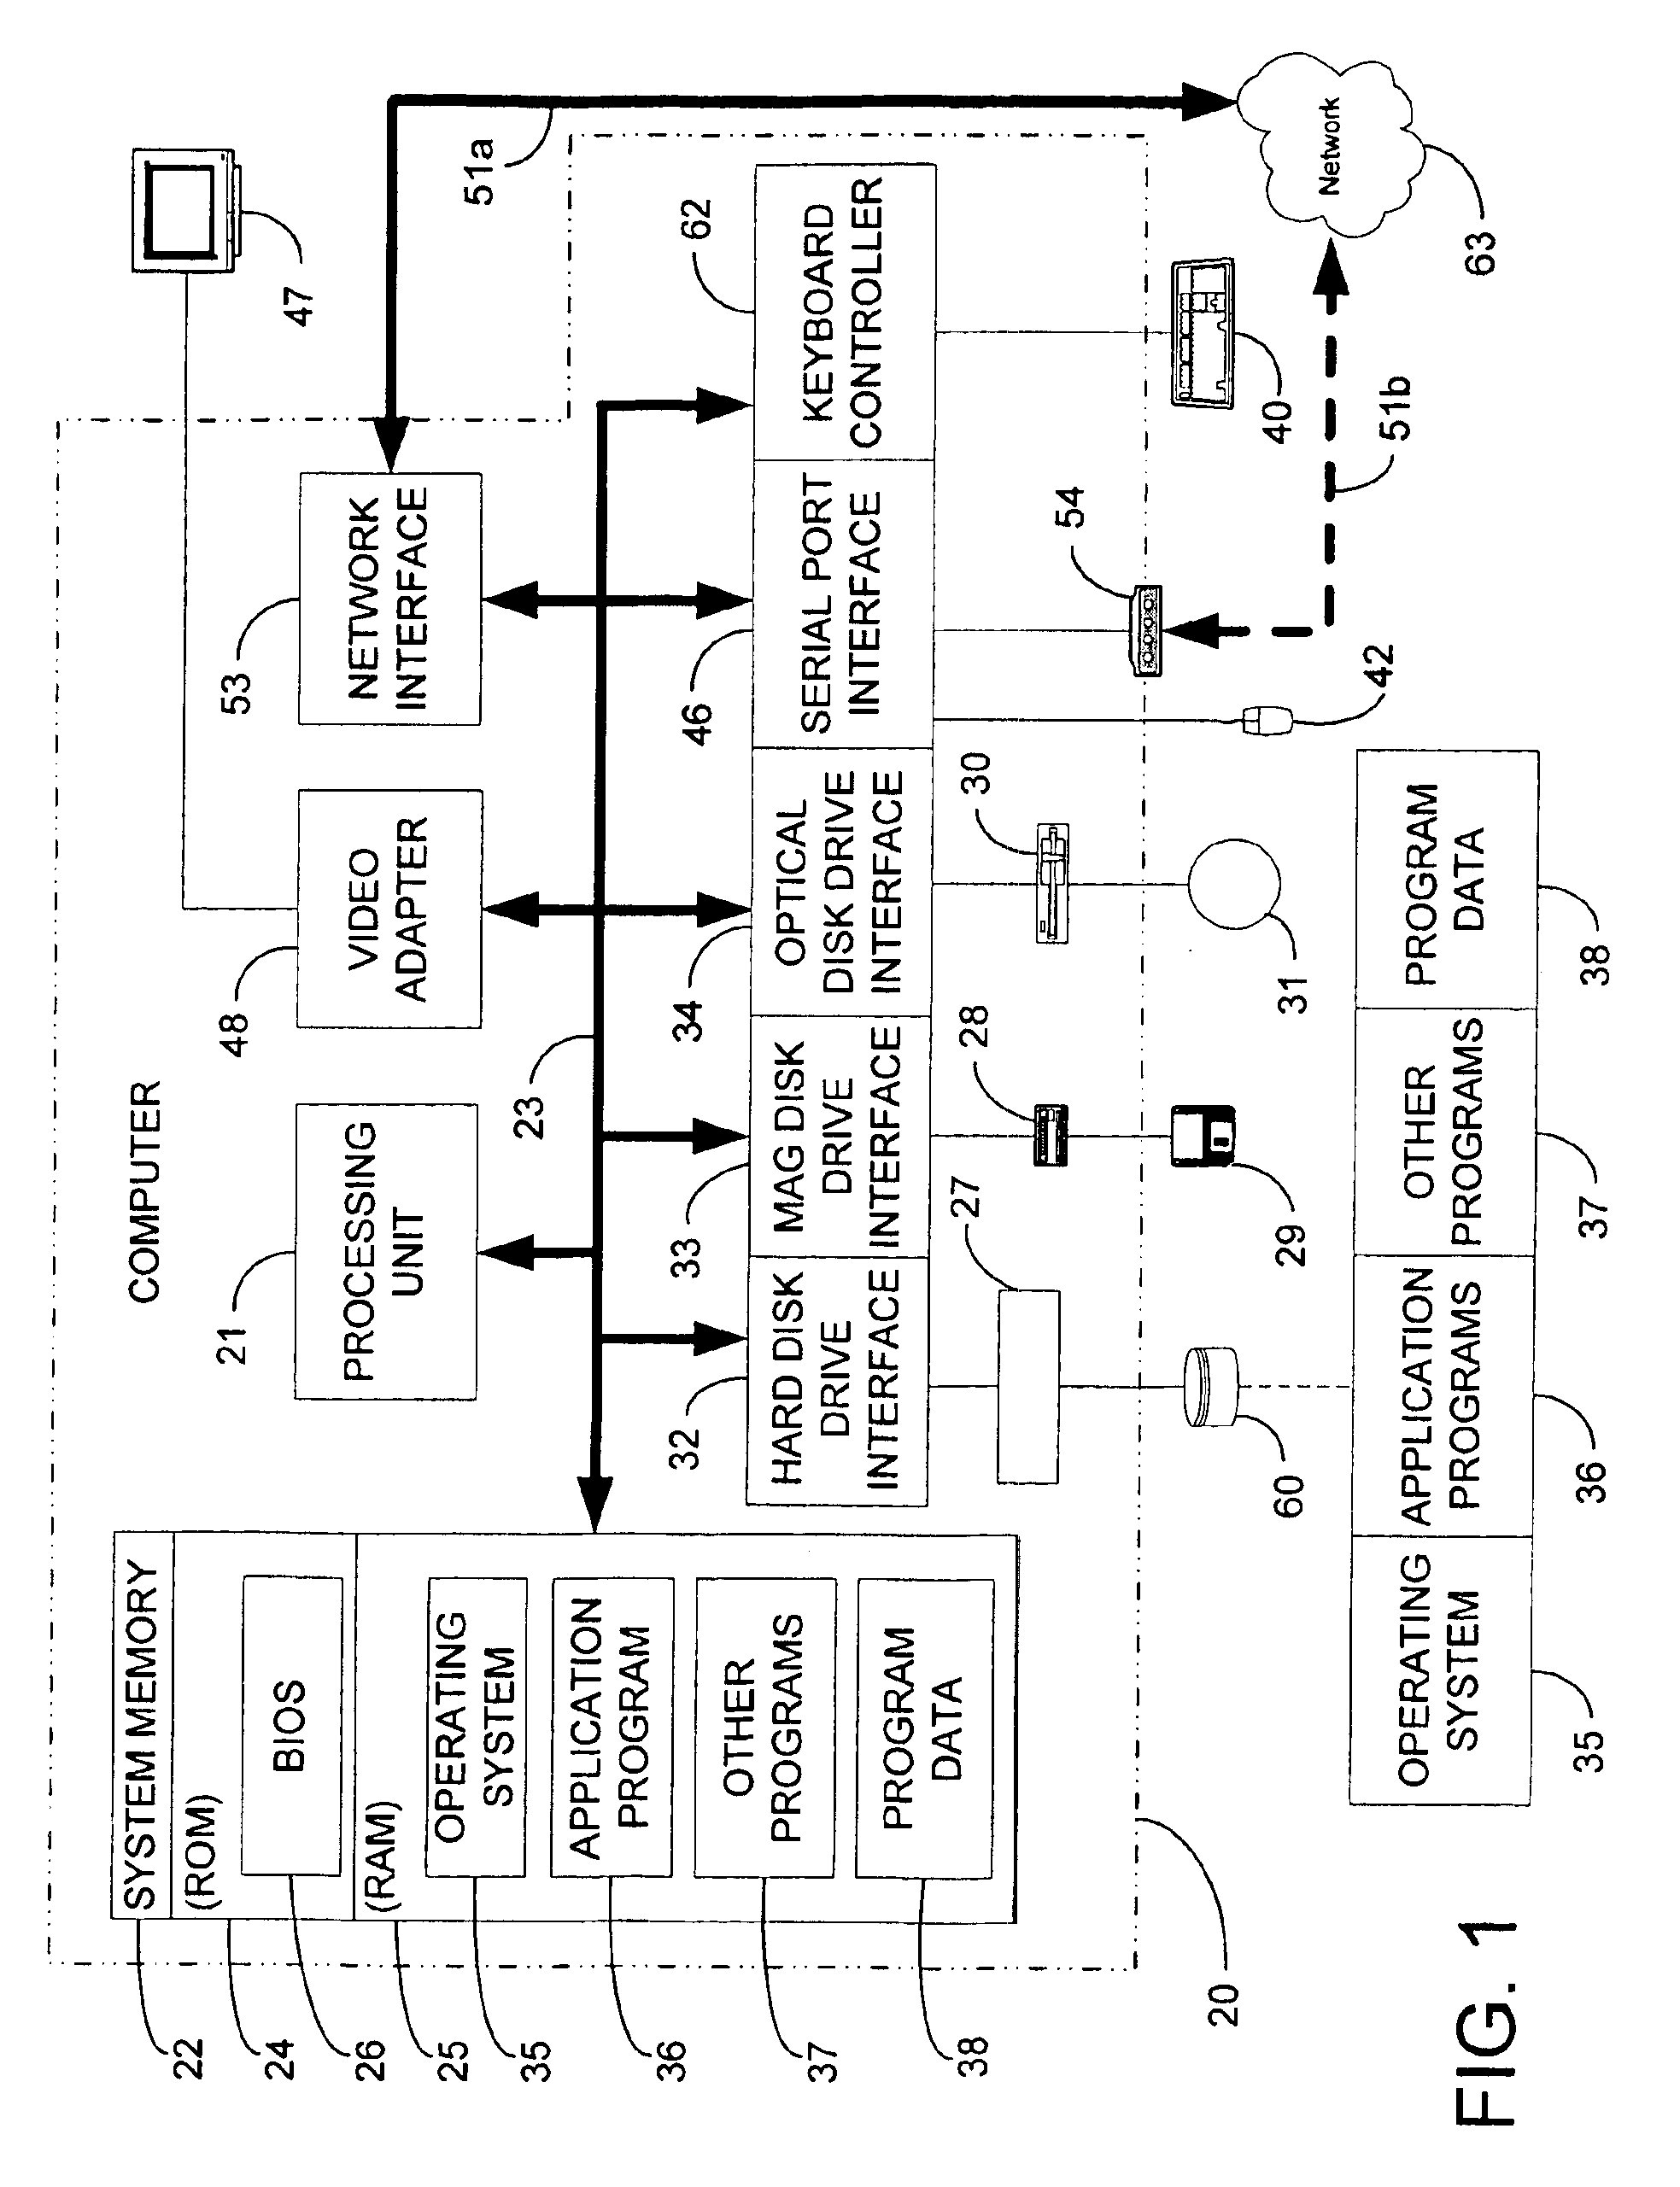 Method and system for debugging a program